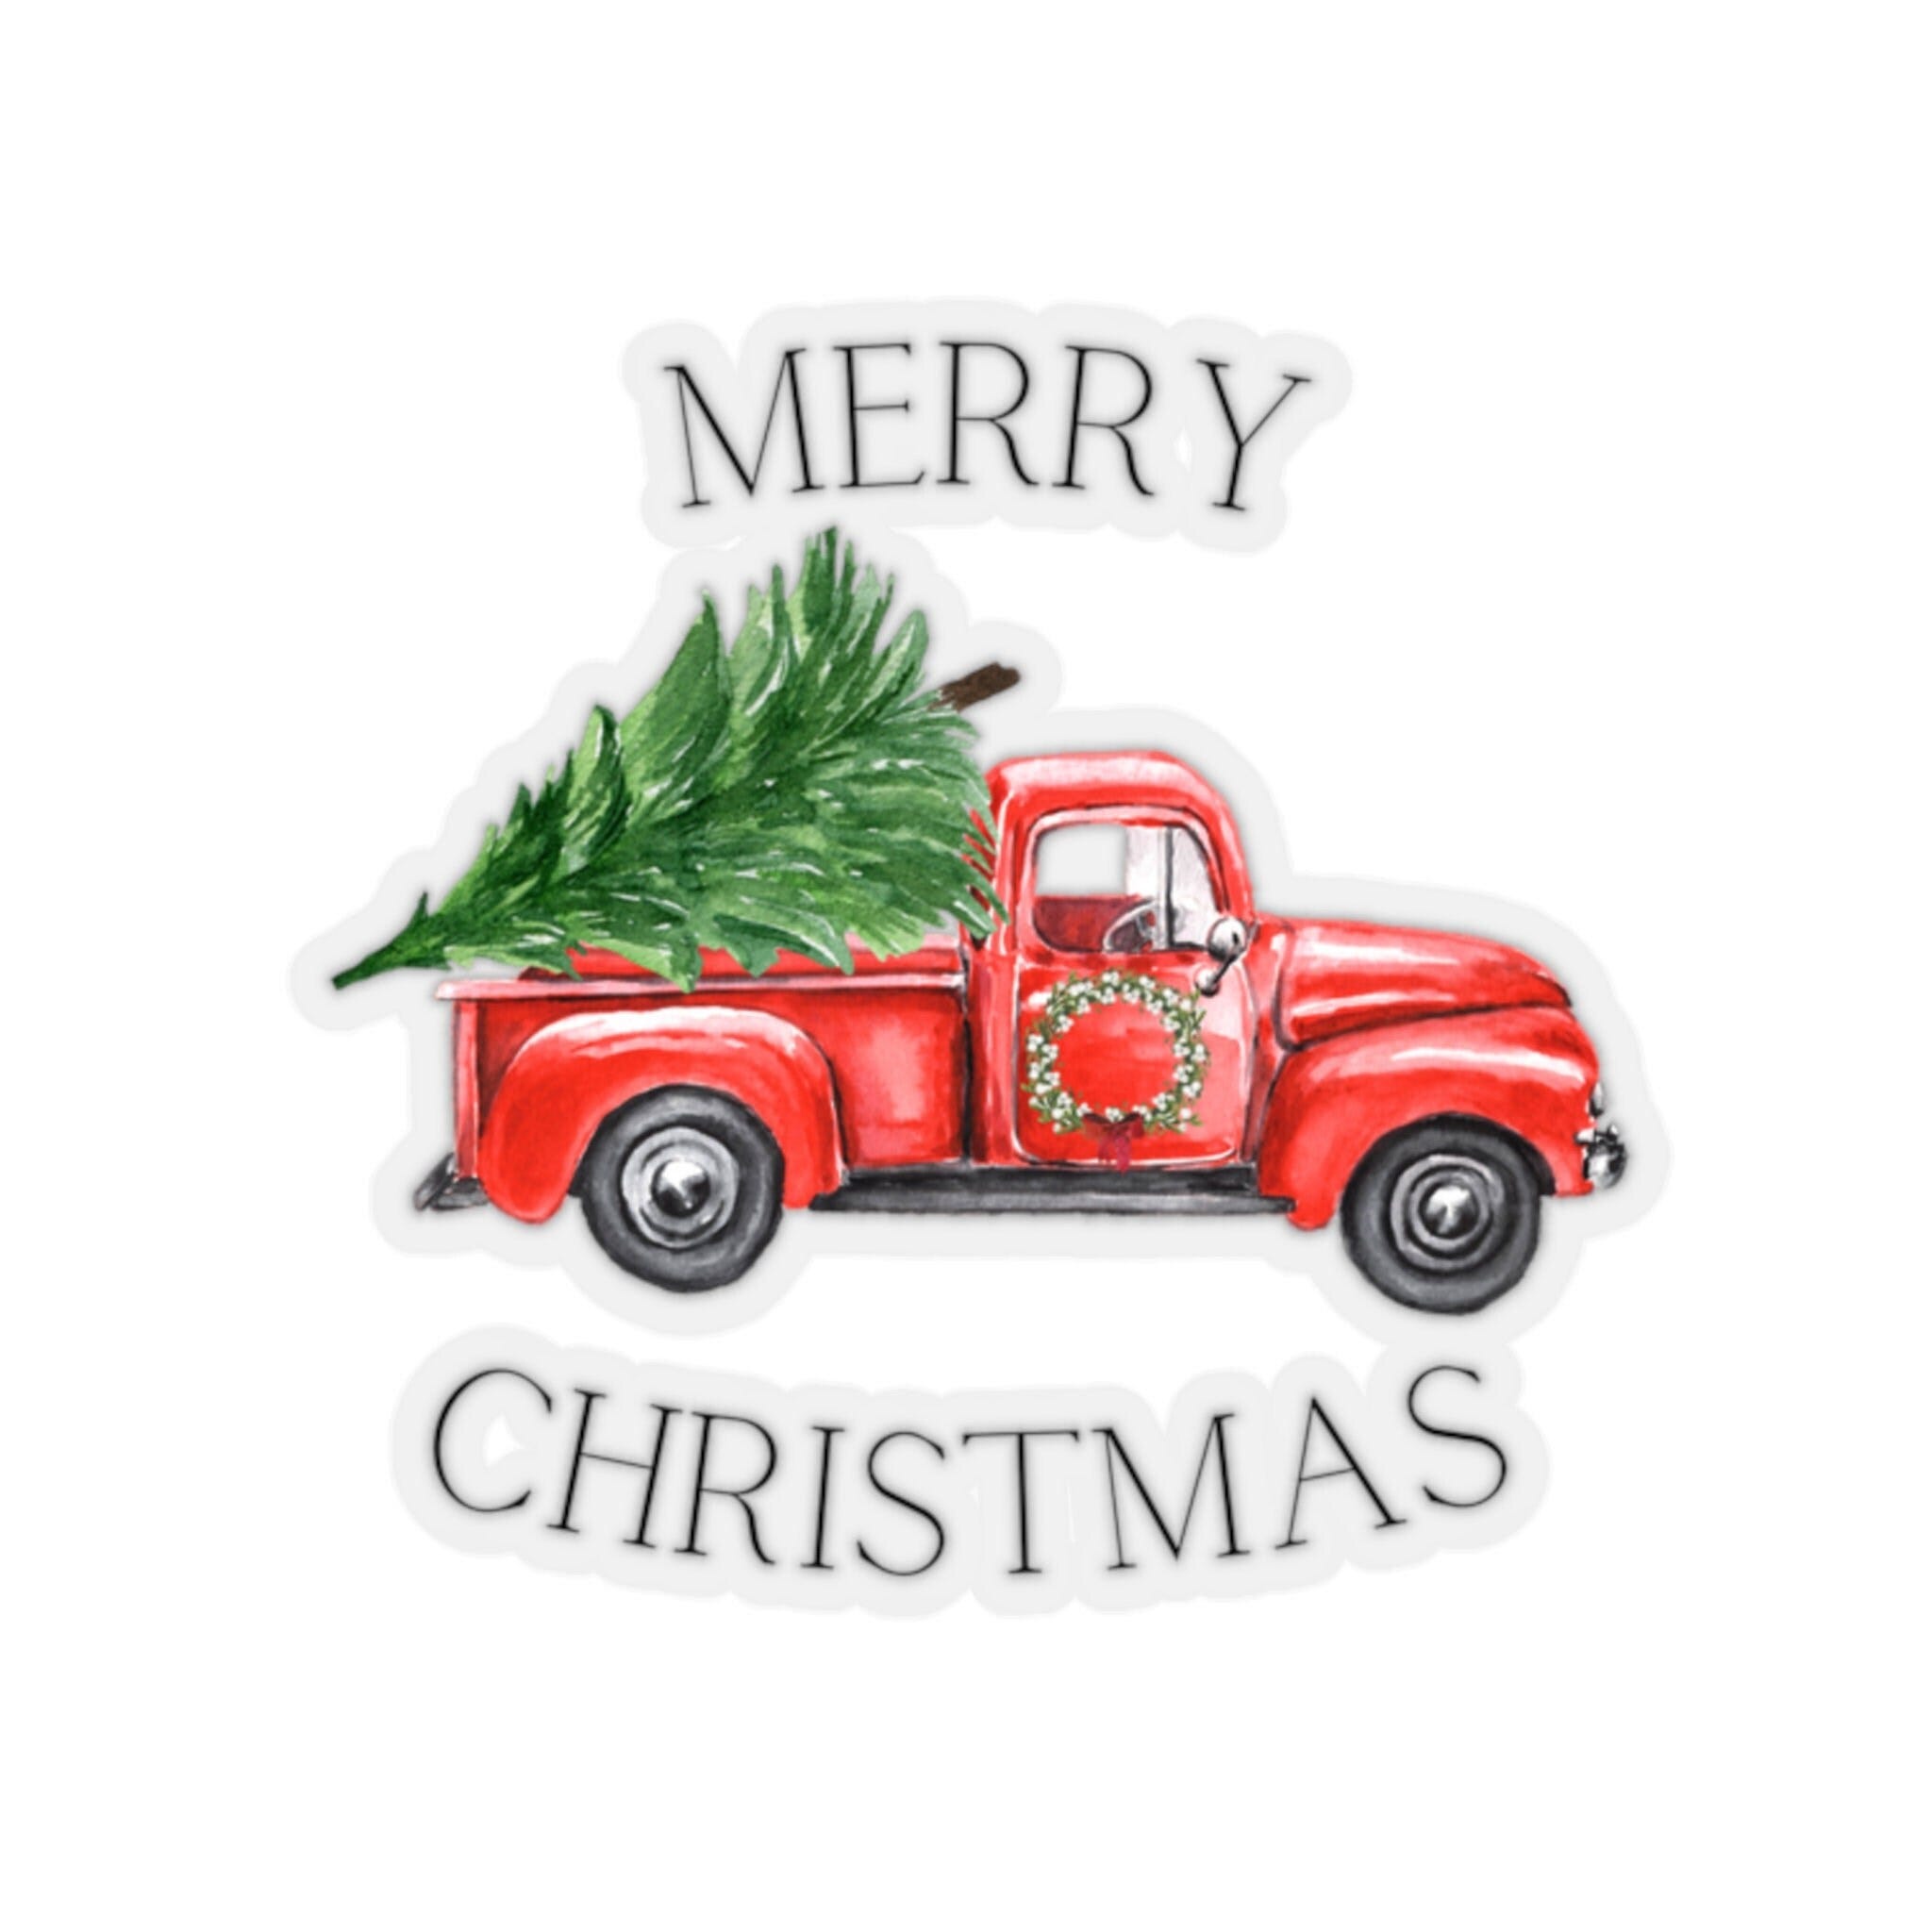 Christmas Tree Truck vinyl decal, Classic Red Truck Vintage Truck Christmas Sticker, Merry Christmas Sticker 4x4, 6x6 Holiday Stickers